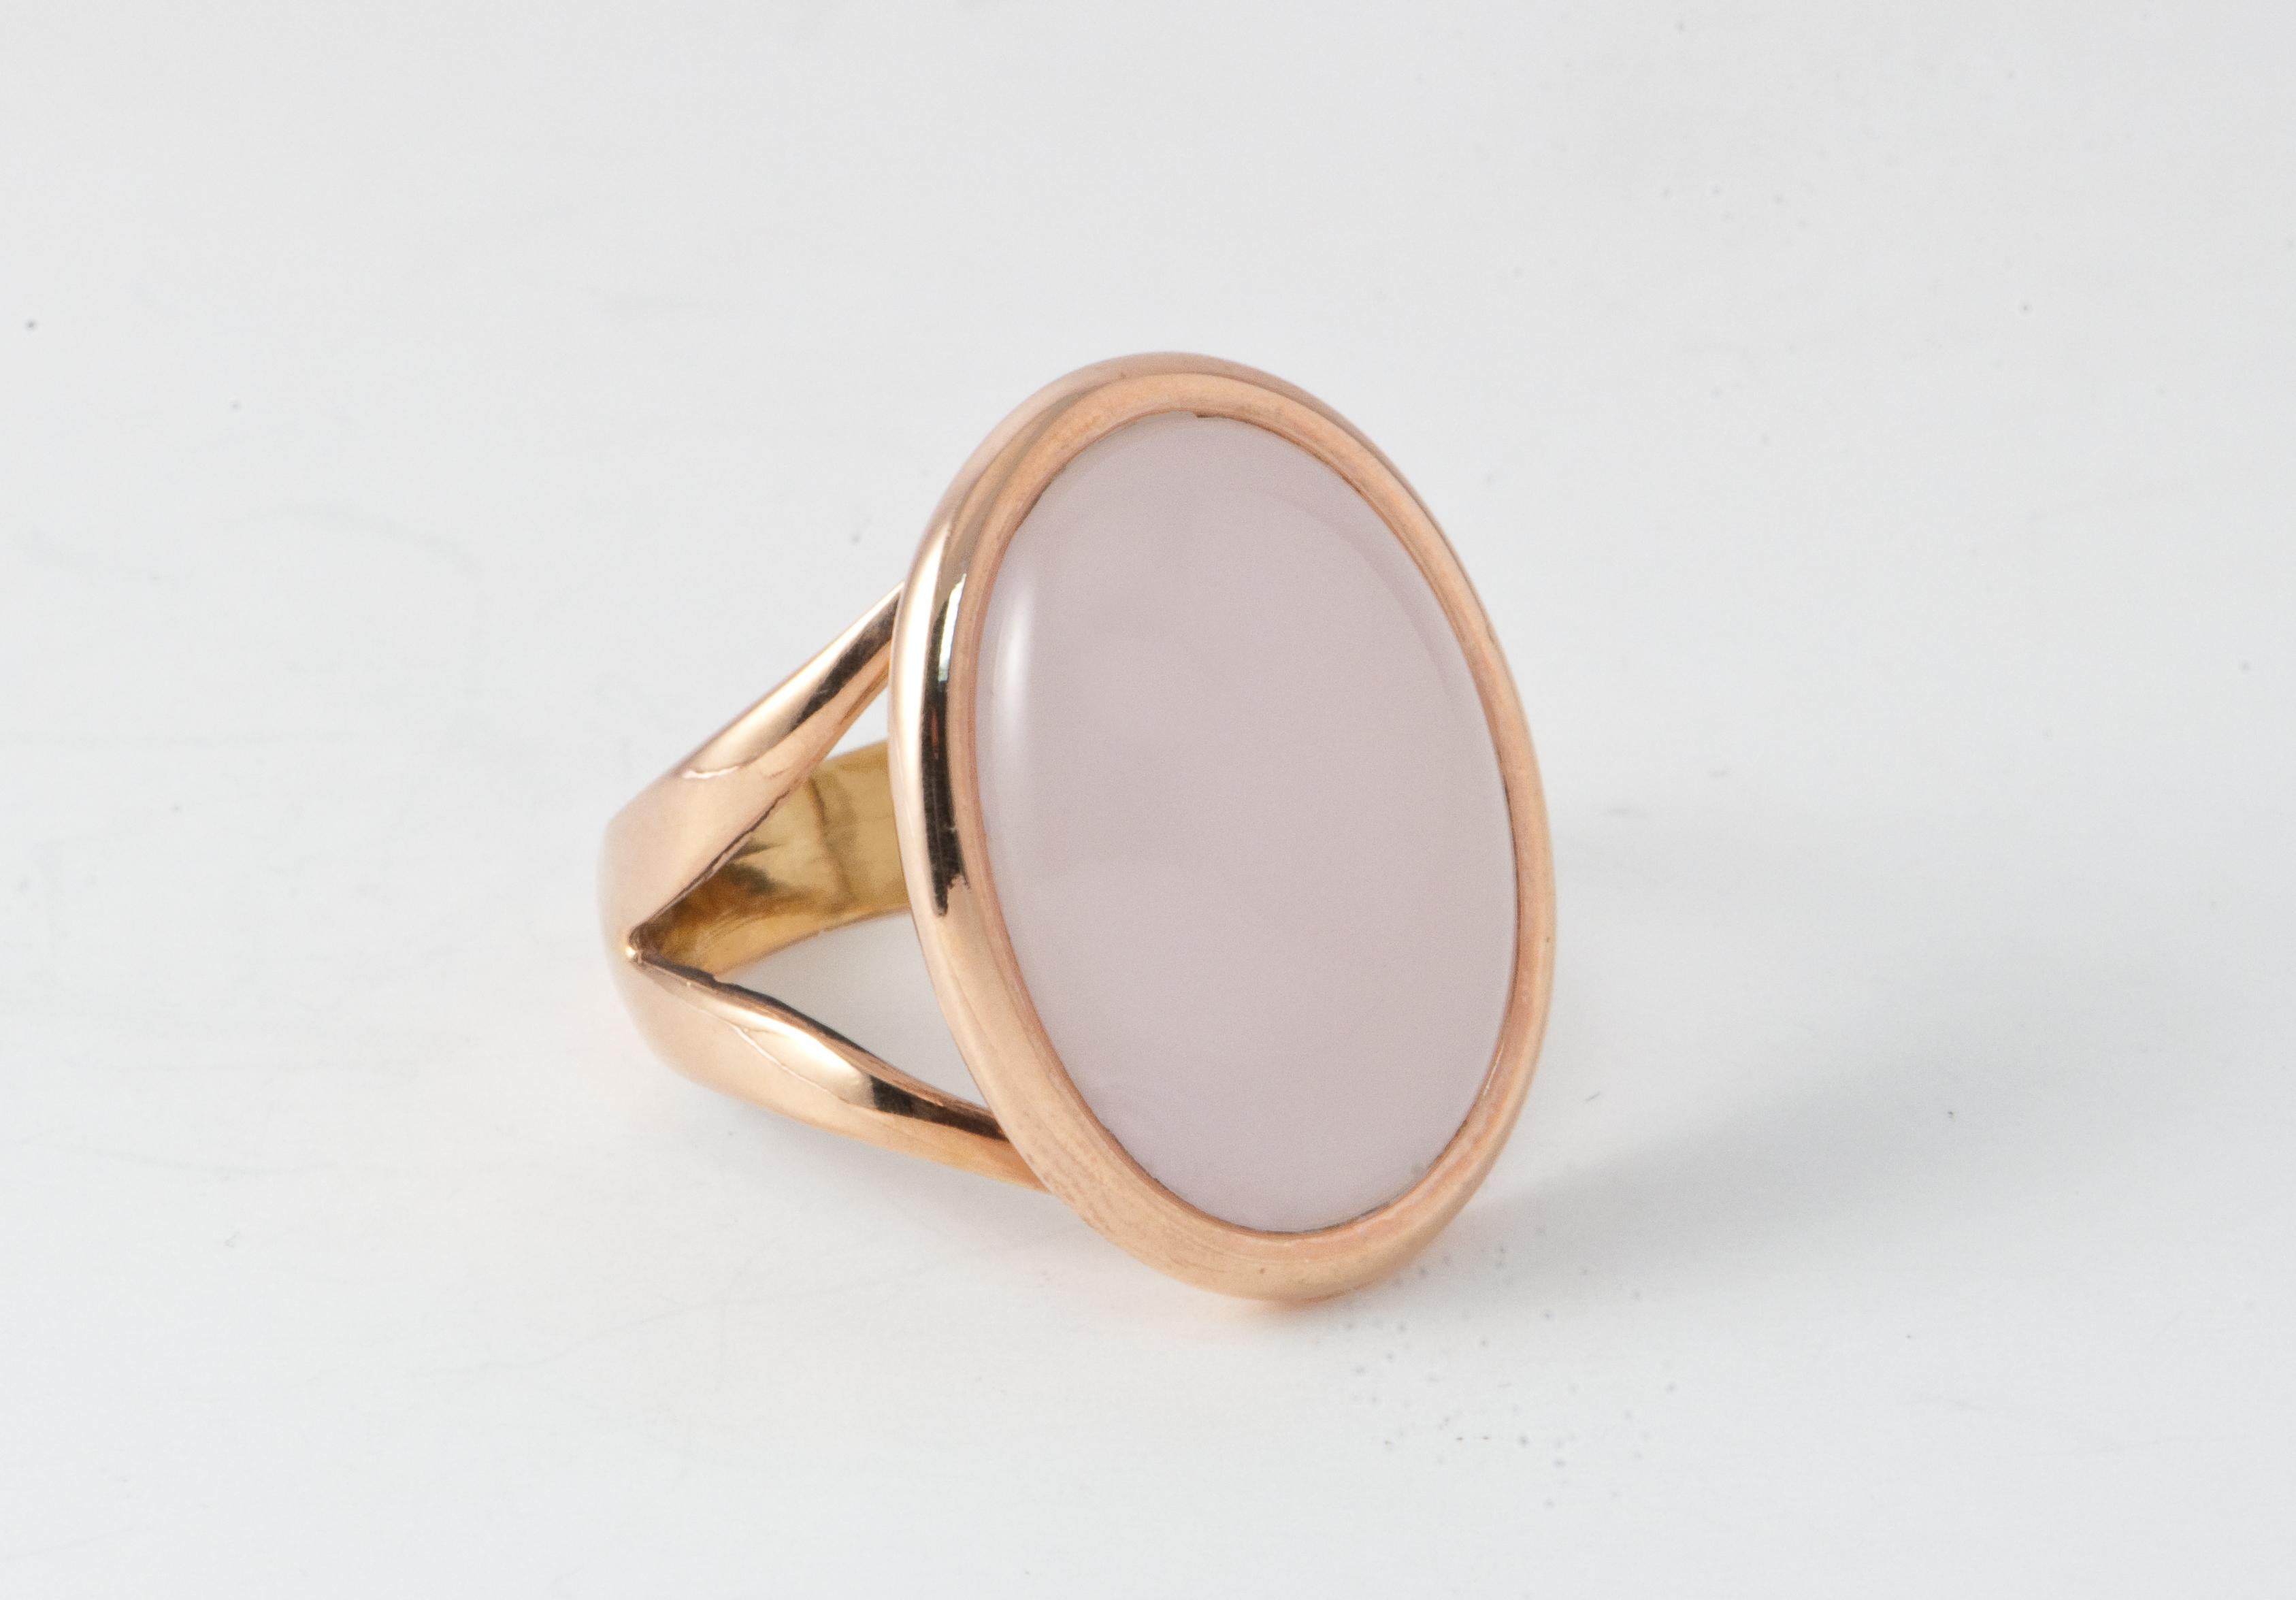  Pink Quartz Nacre Shape Cabochon Ring Pink Gold 18 Karat In New Condition For Sale In Vannes, FR